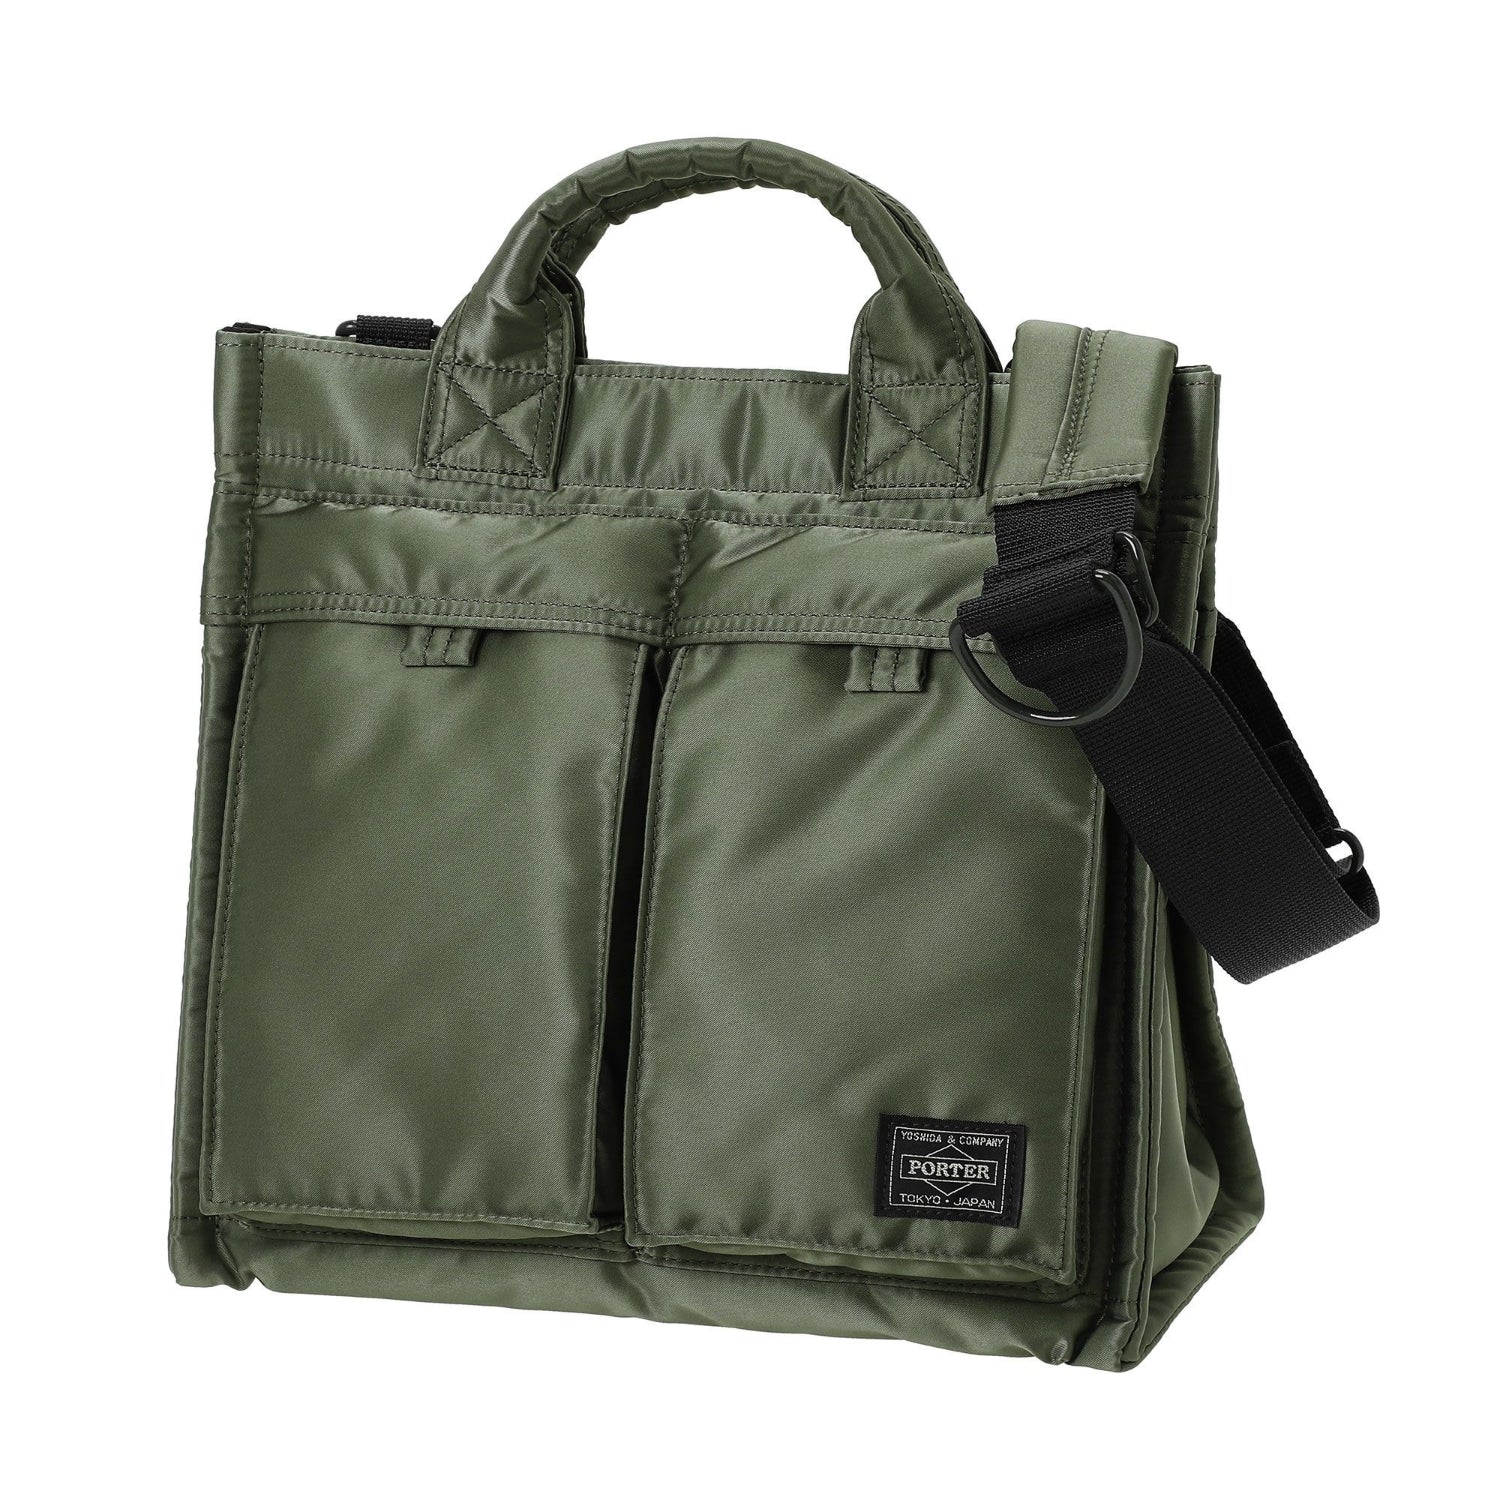 PORTER - PX Tanker 2Way Vertical Tote Bag S - (Sage Green) view 1